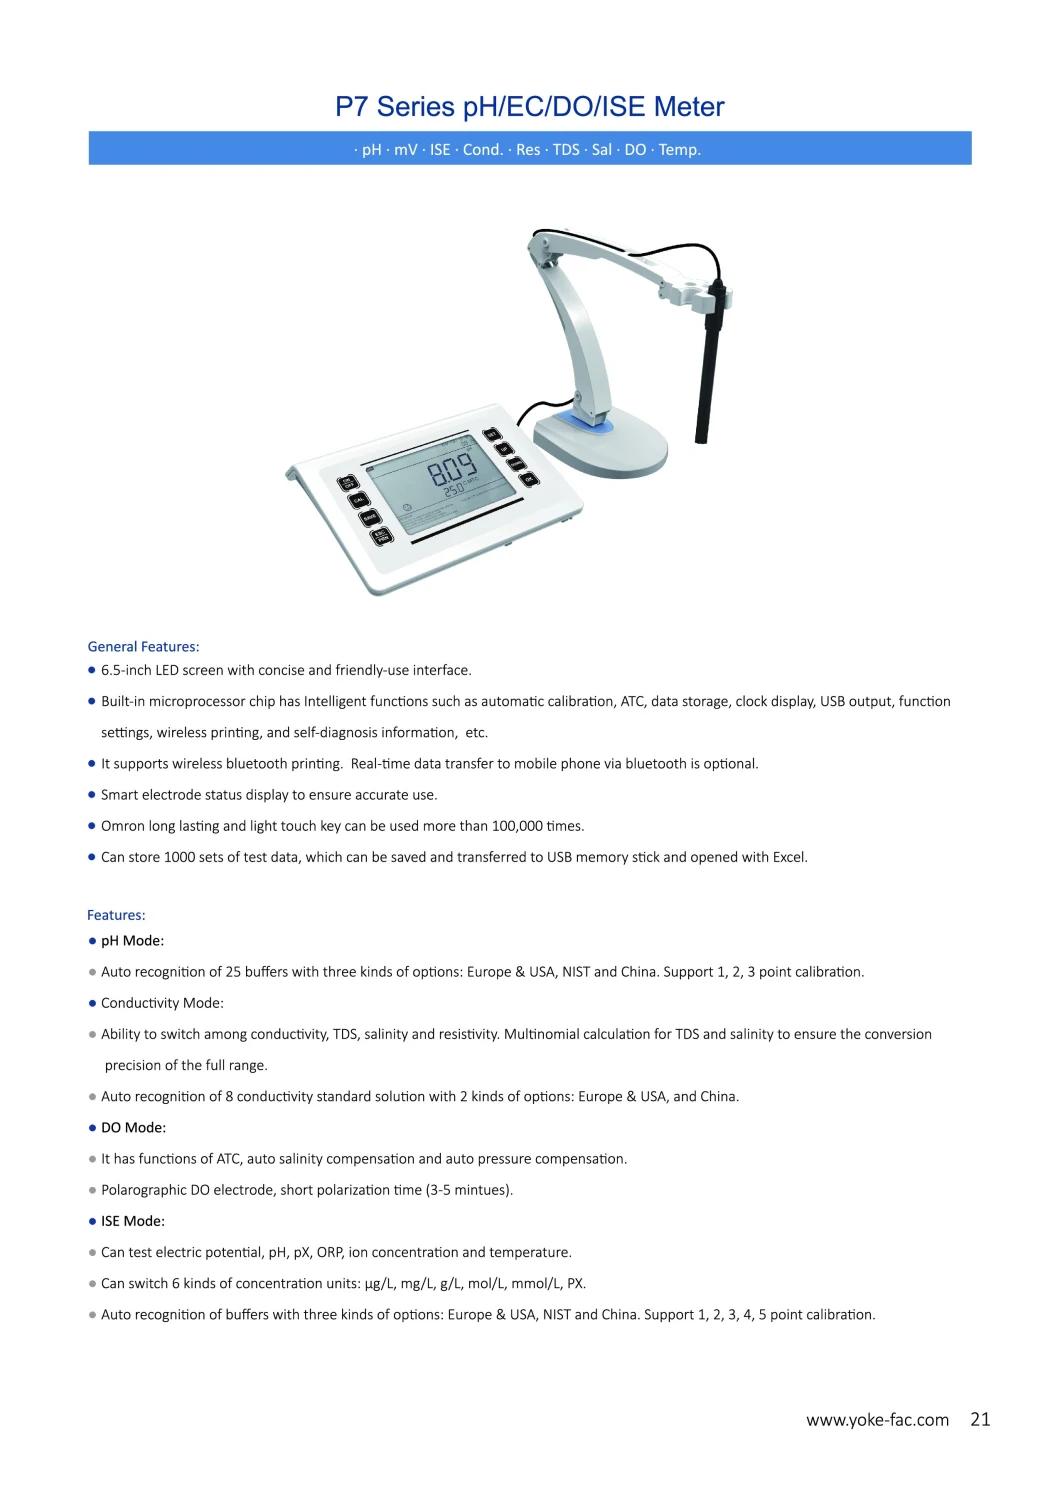 P7 pH/Conductivity Meter with Automatic Calibration, APP Function Is Optional